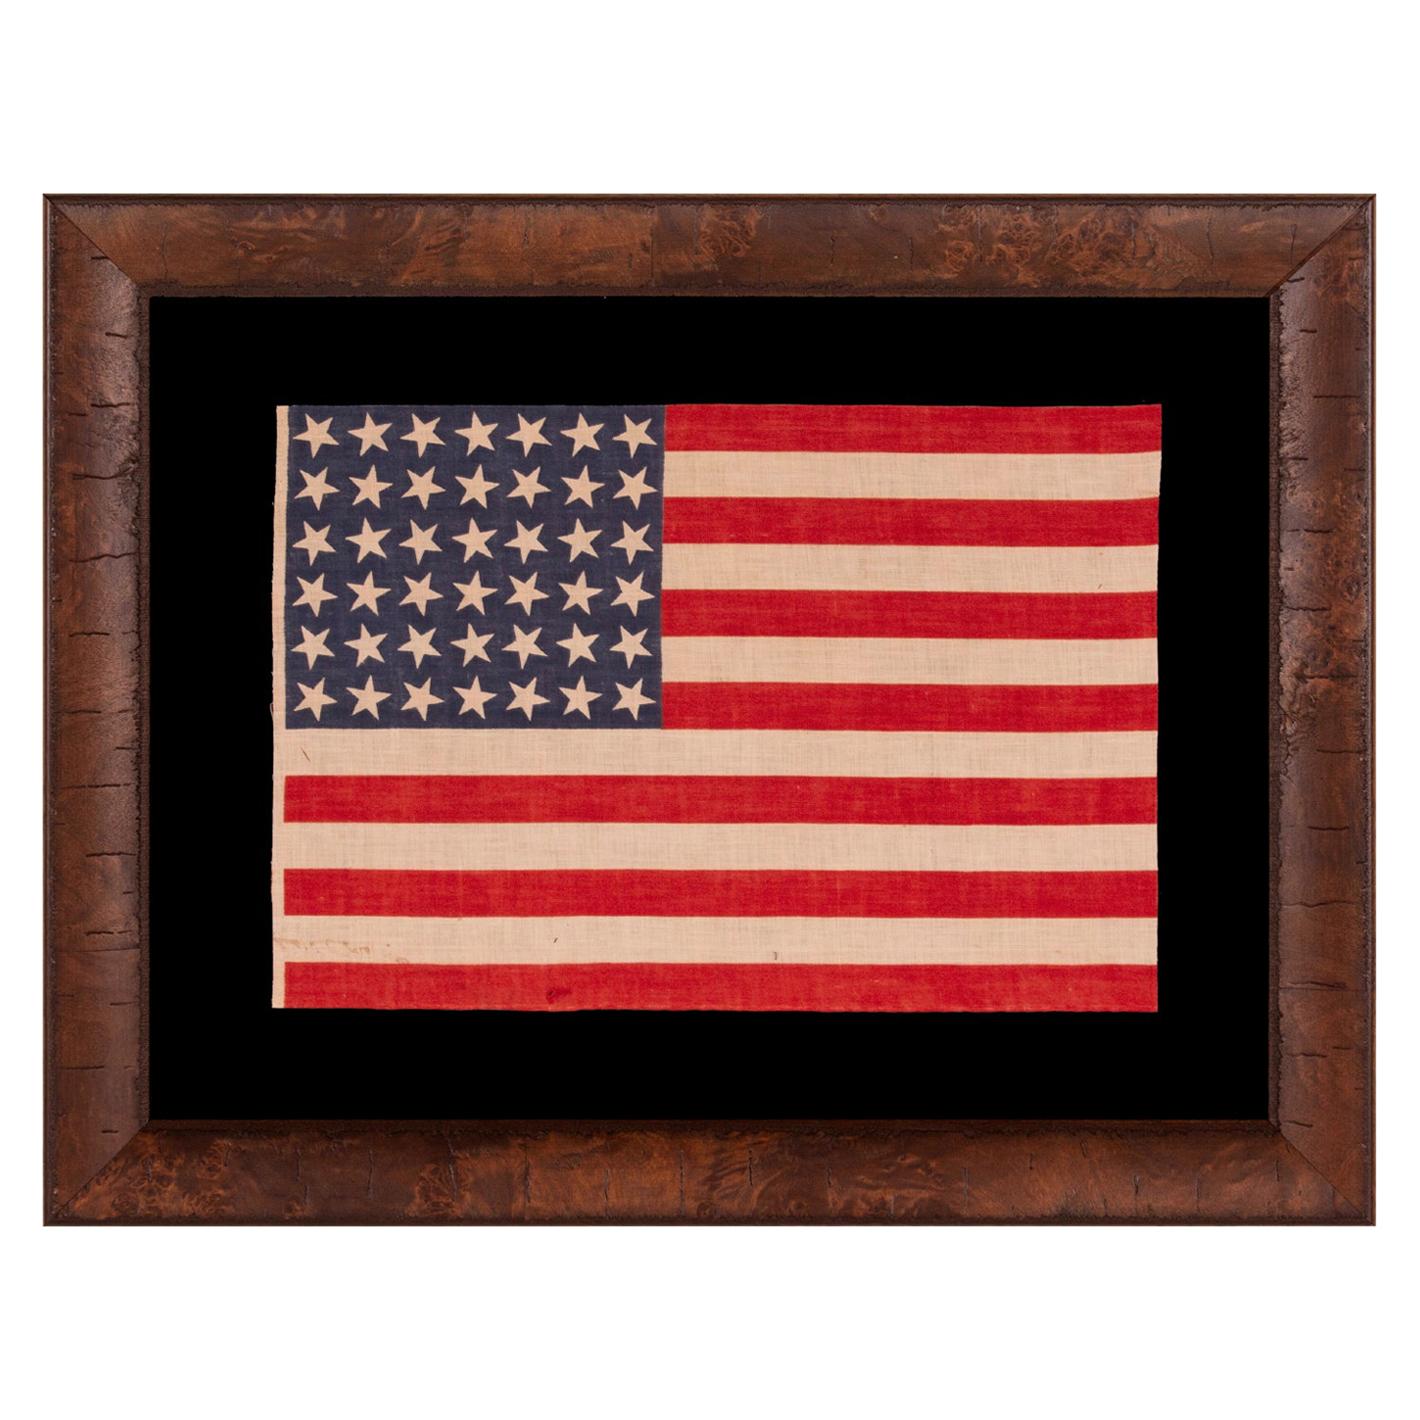 42 Stars, an Unofficial Star Count on an Antique American Flag, Scattered Stars